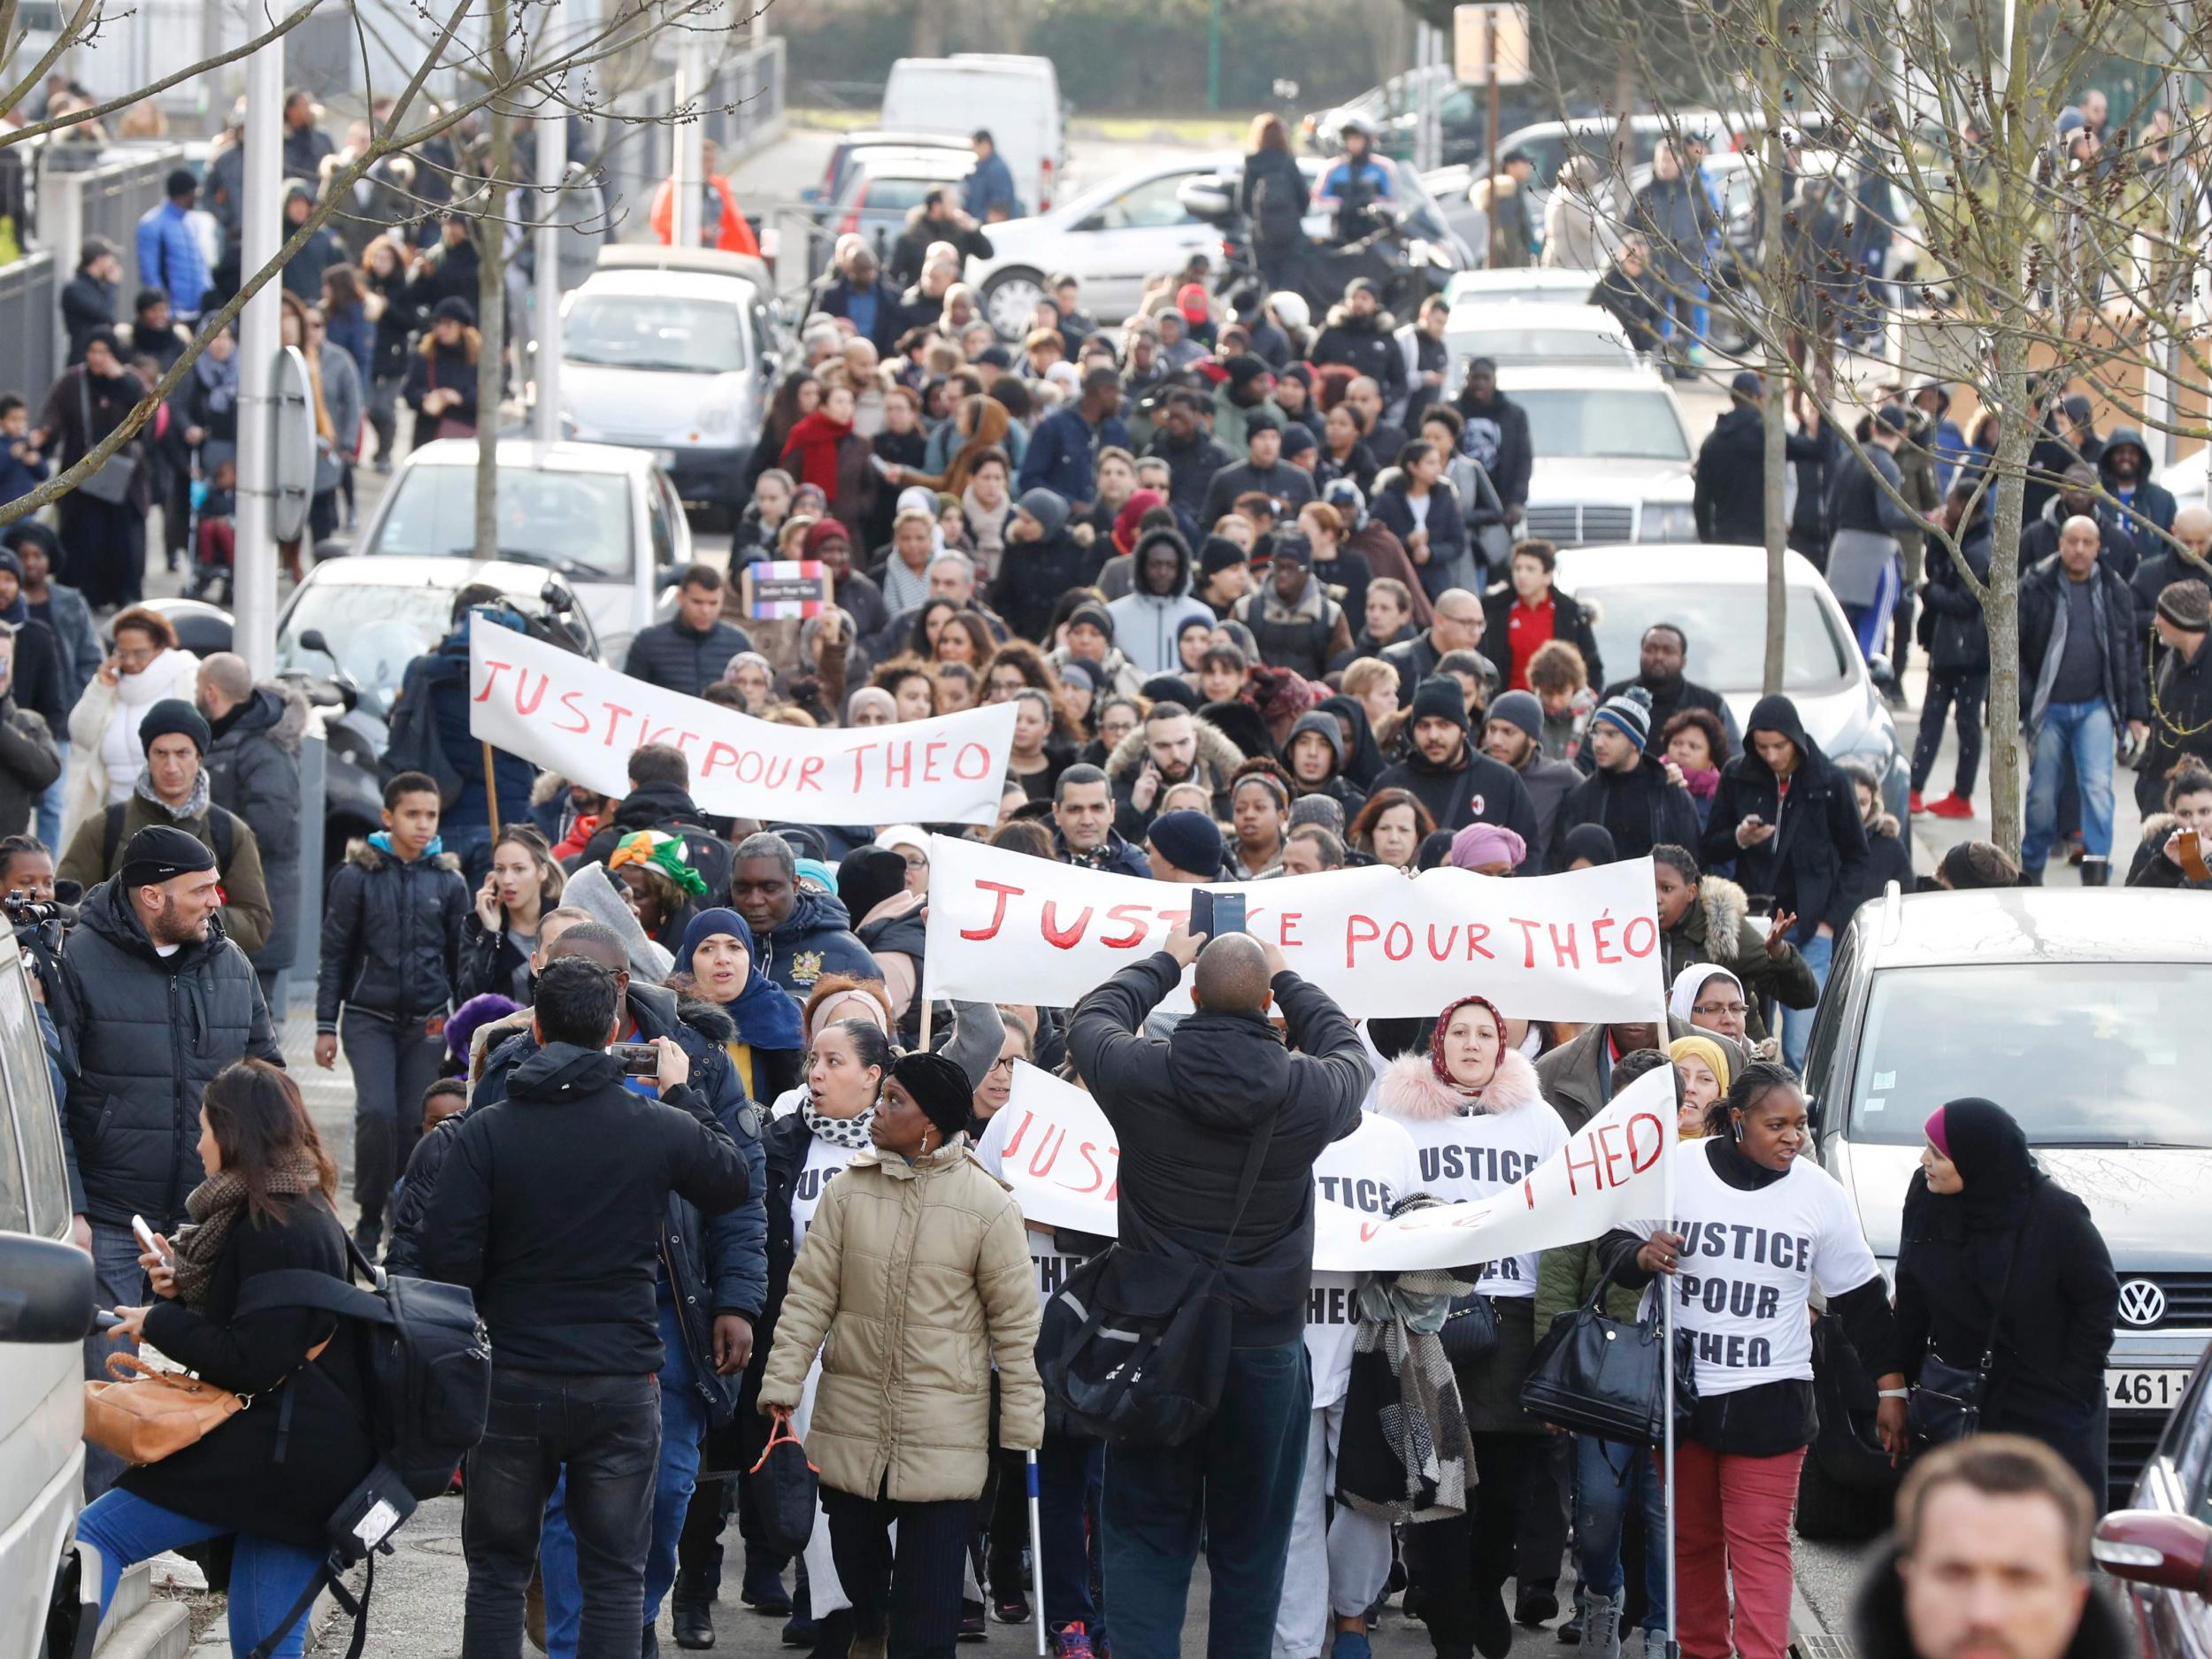 People hold a sign reading "Justice for Theo" during a protest in Aulnay-sous-Bois on Monday, a day after a French police officer was charged with the rape of a young man